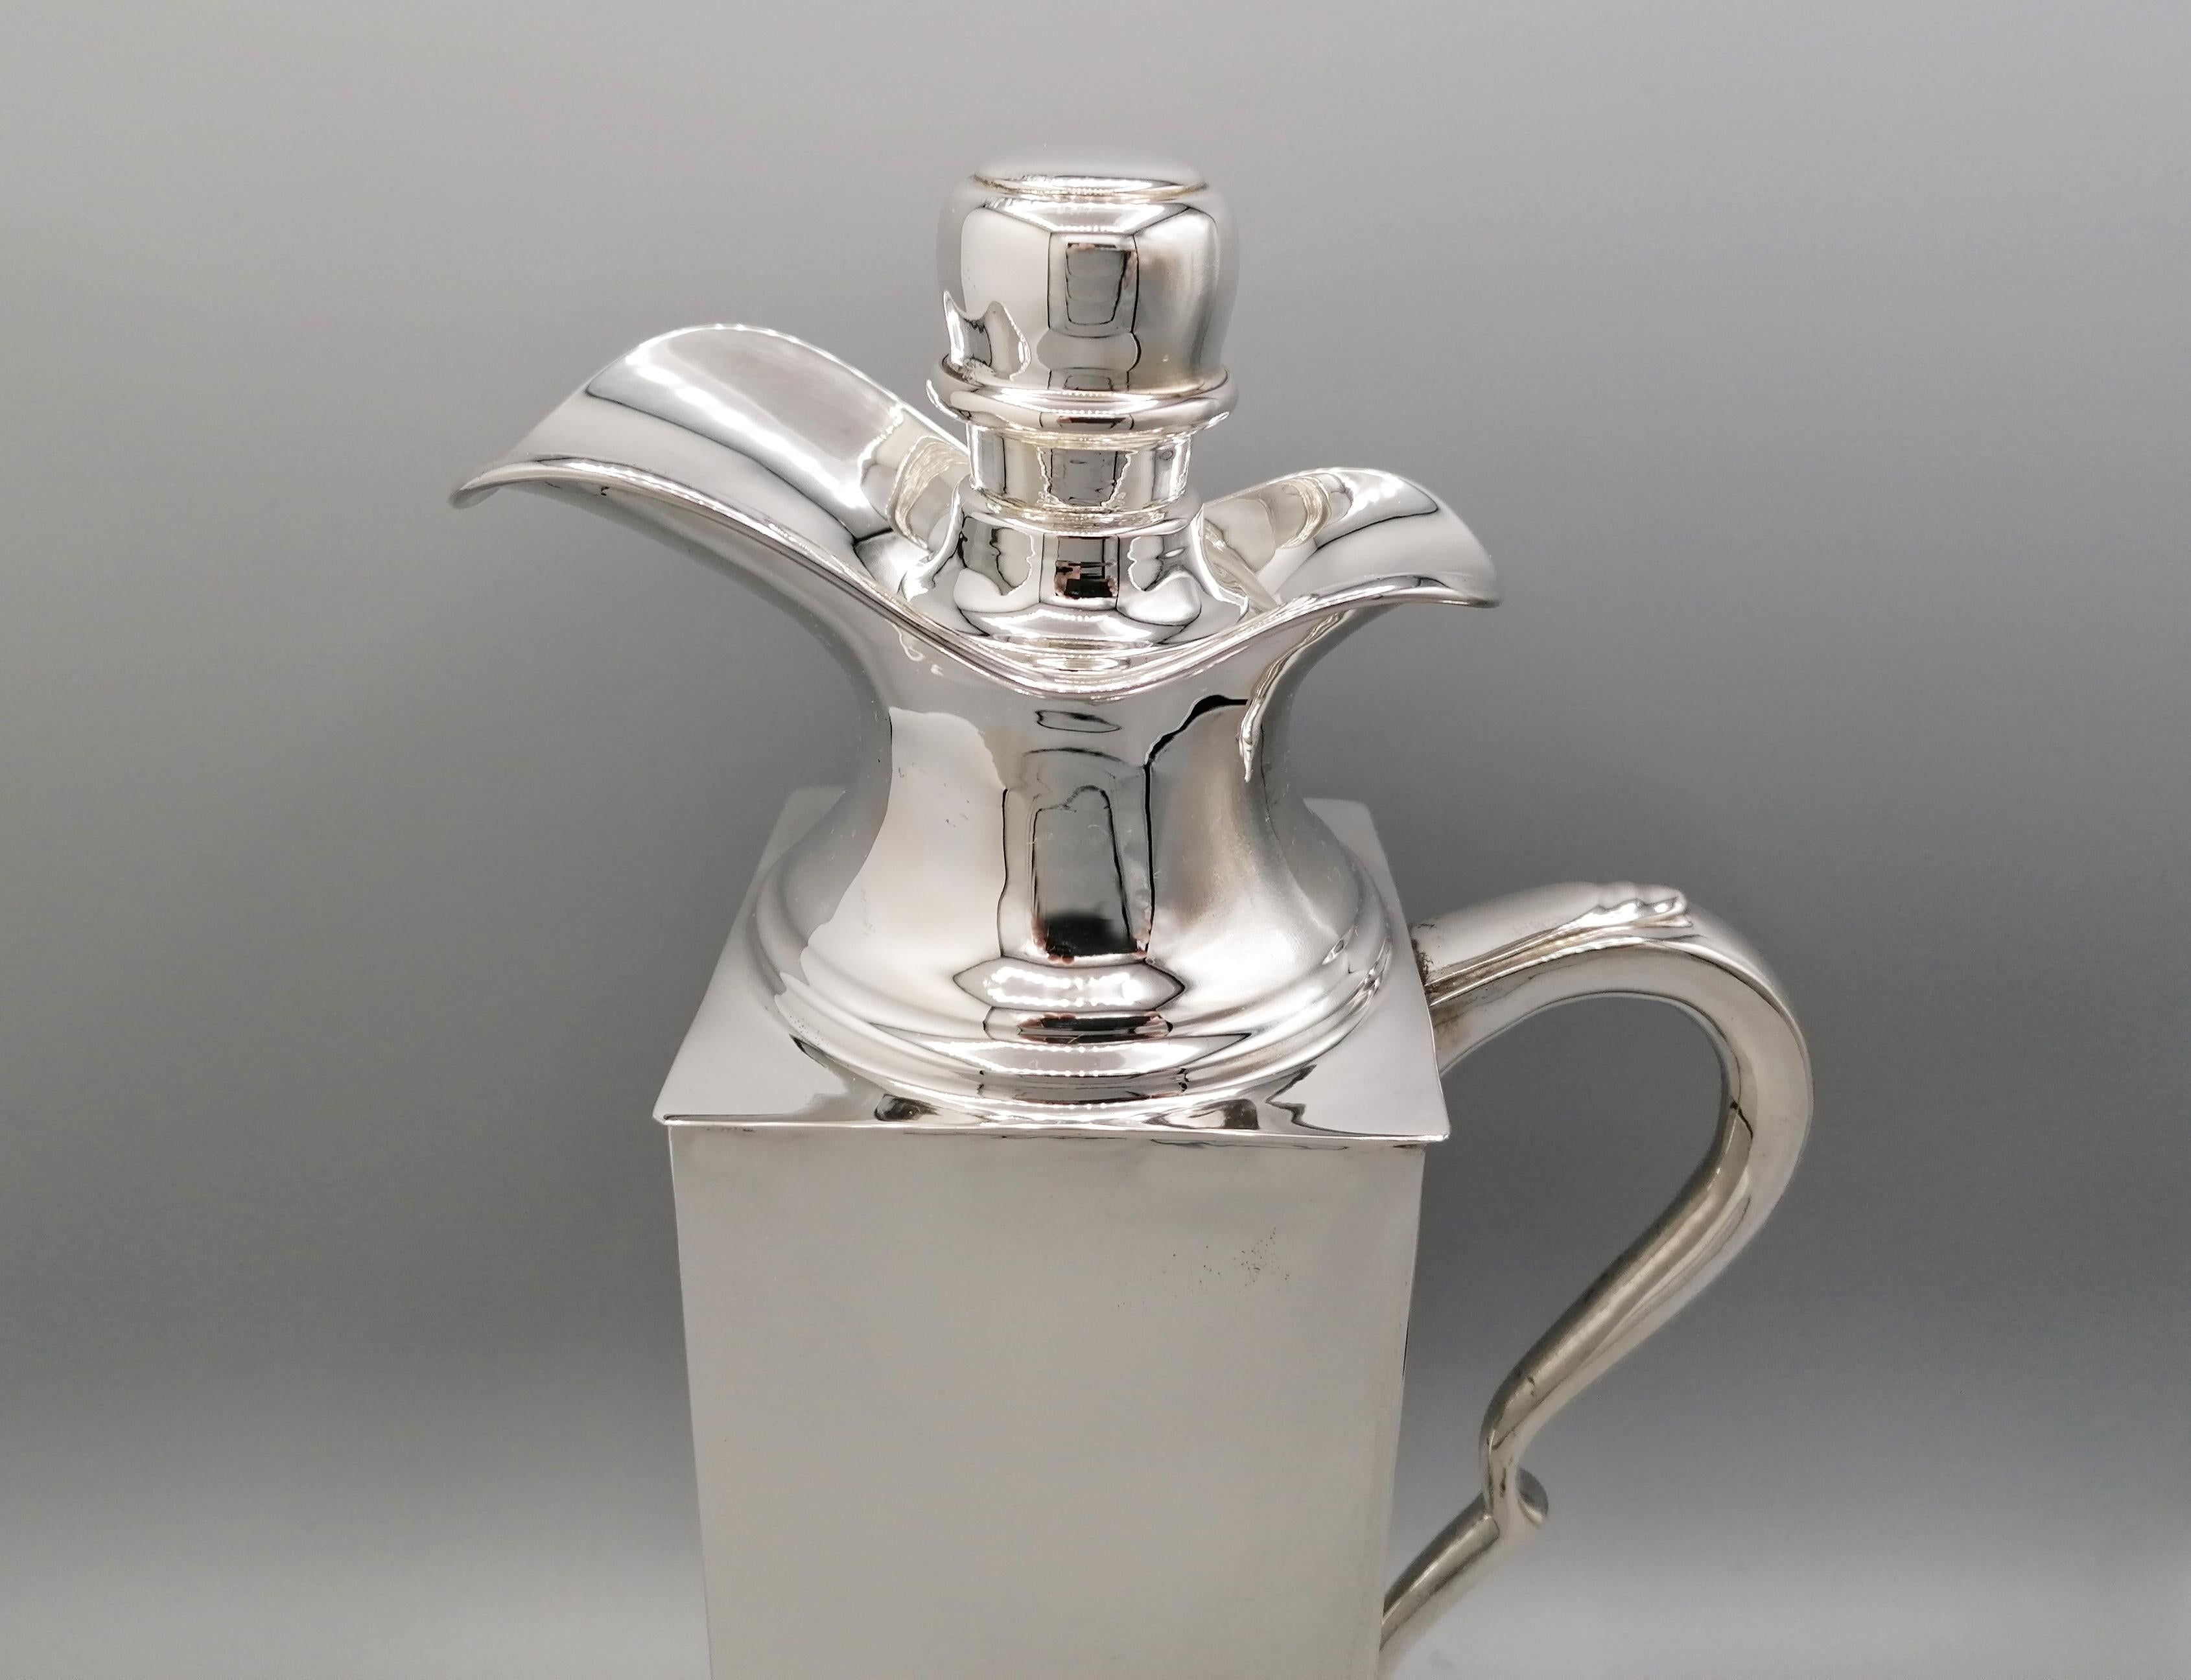 800 solid silver thermo jug made entirely by hand from the silver sheet. The body is square and developing it in its height forms a parallelepiped. The spout is shaped to allow the liquid to flow down. Inside there is a removable bottle that can